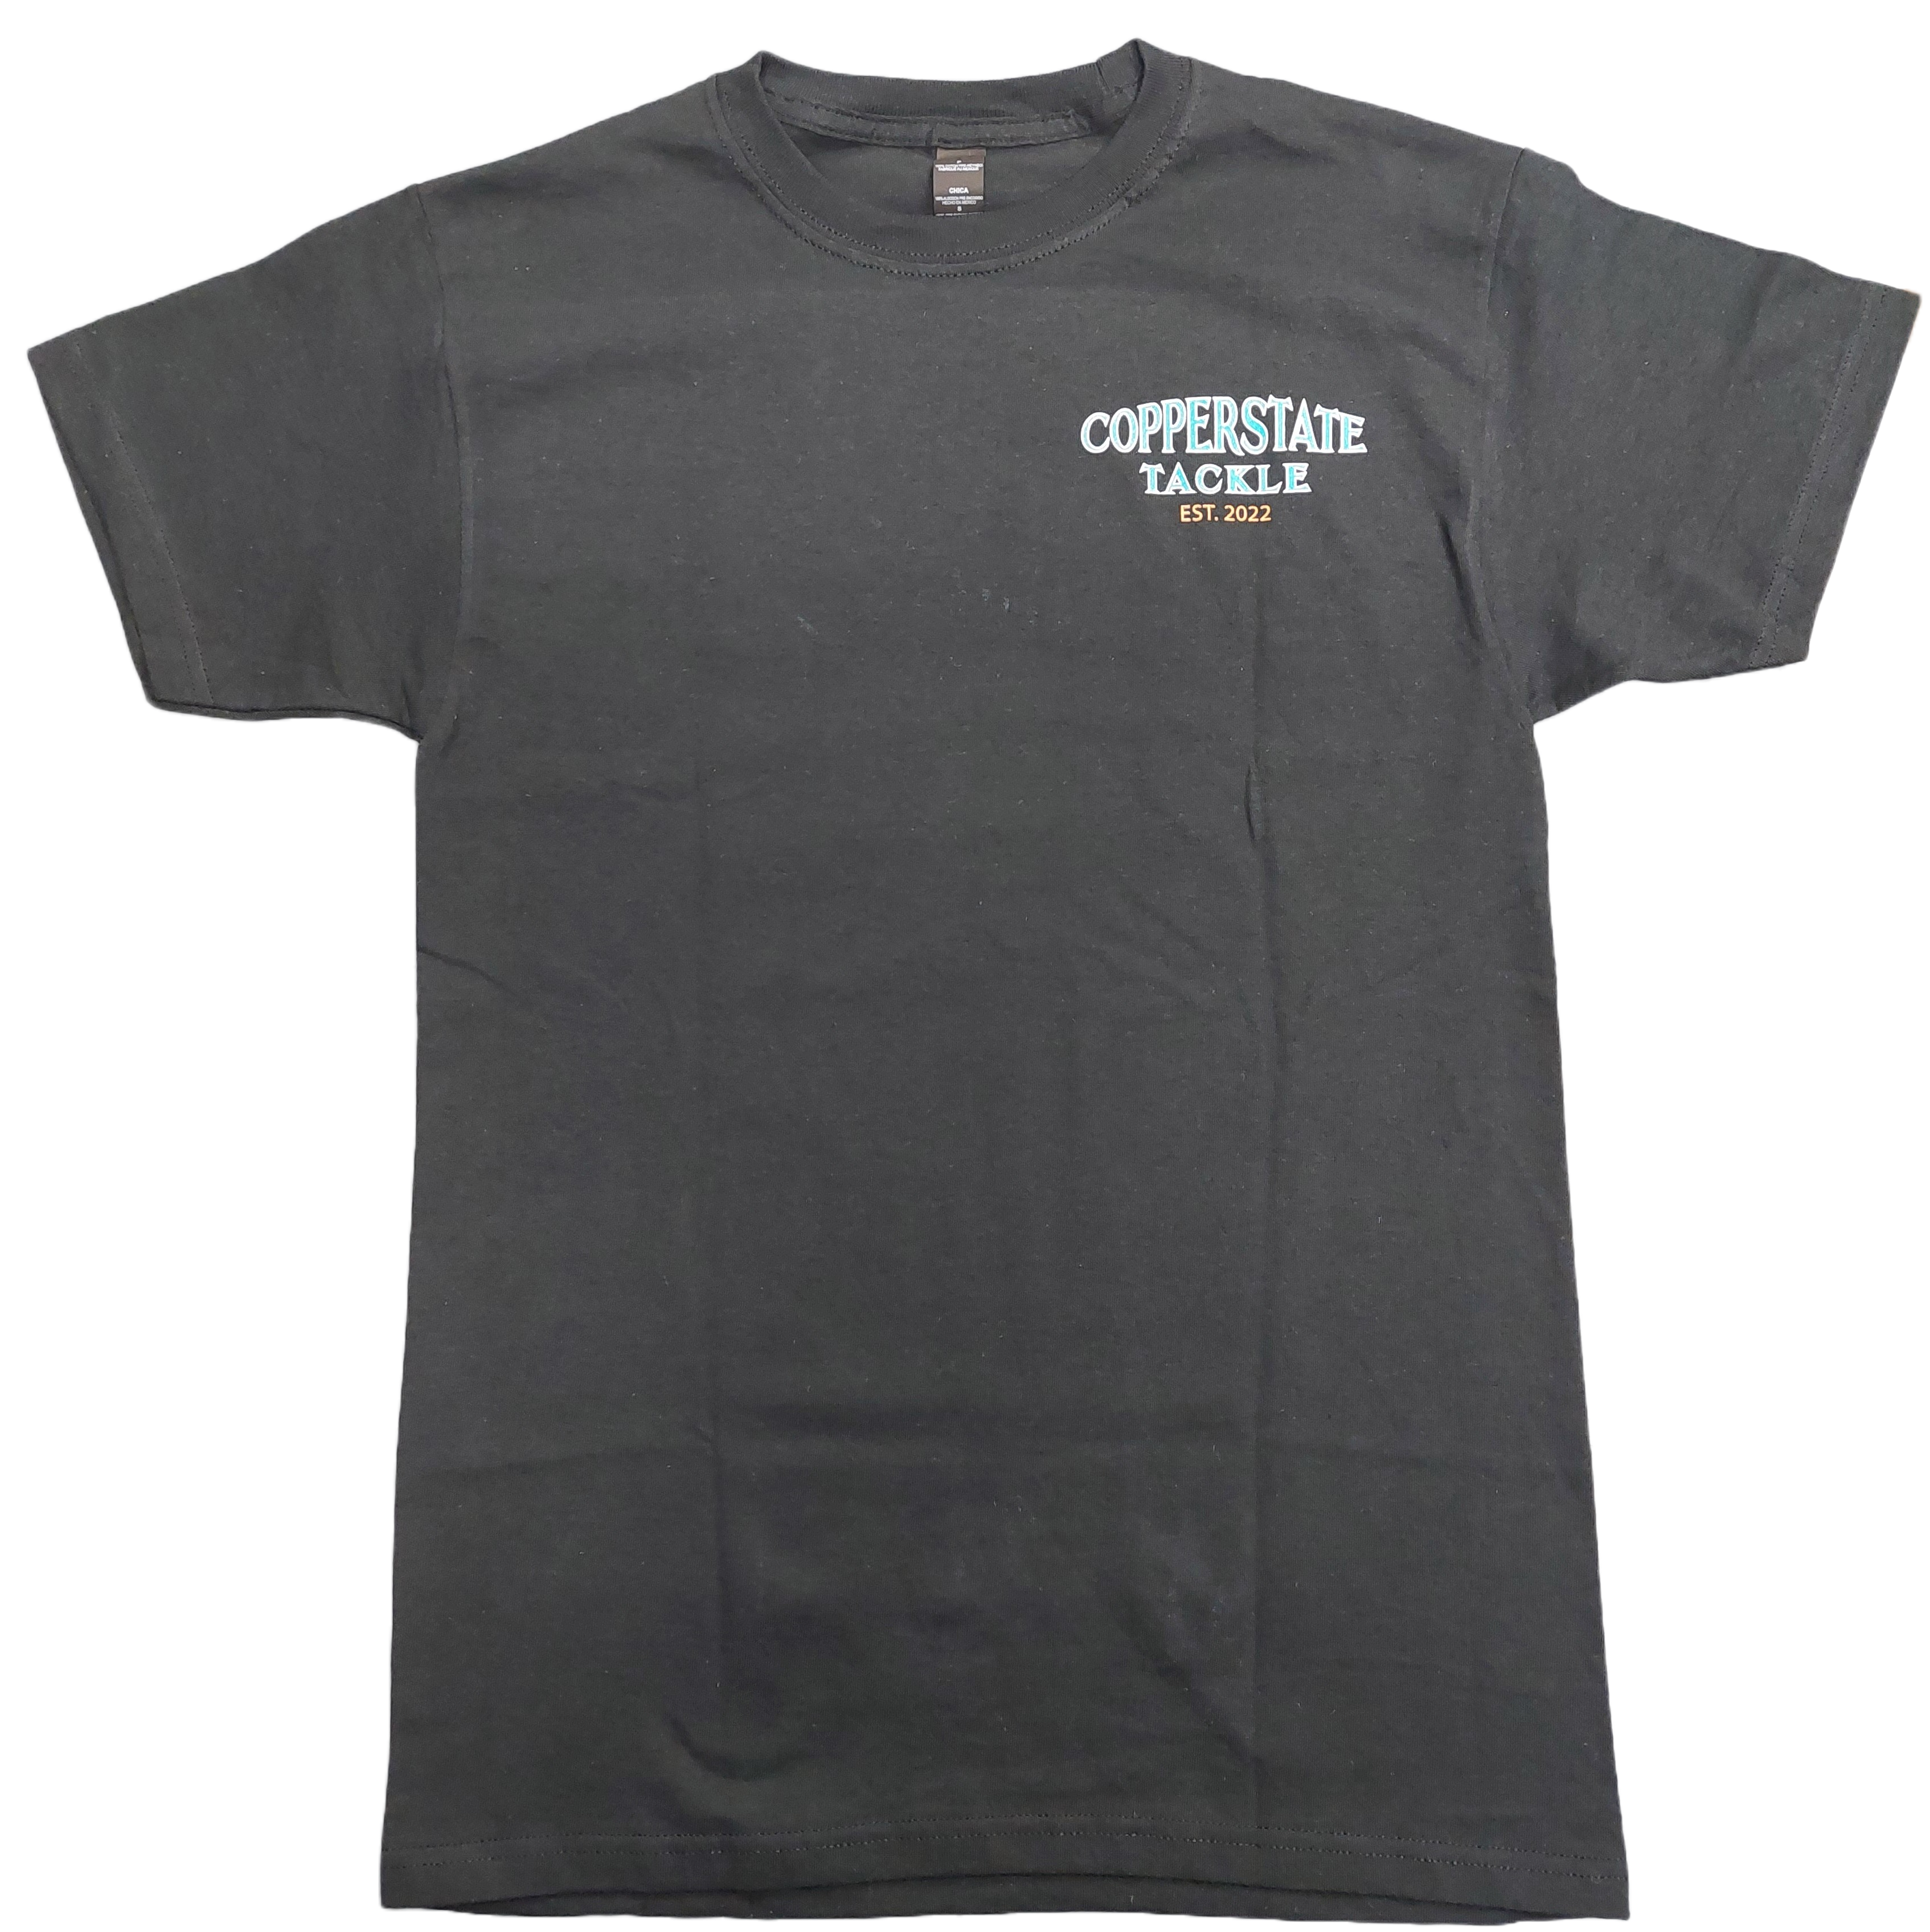 COPPERSTATE TACKLE ICAST ARIZONA EDITION SHIRT - 0